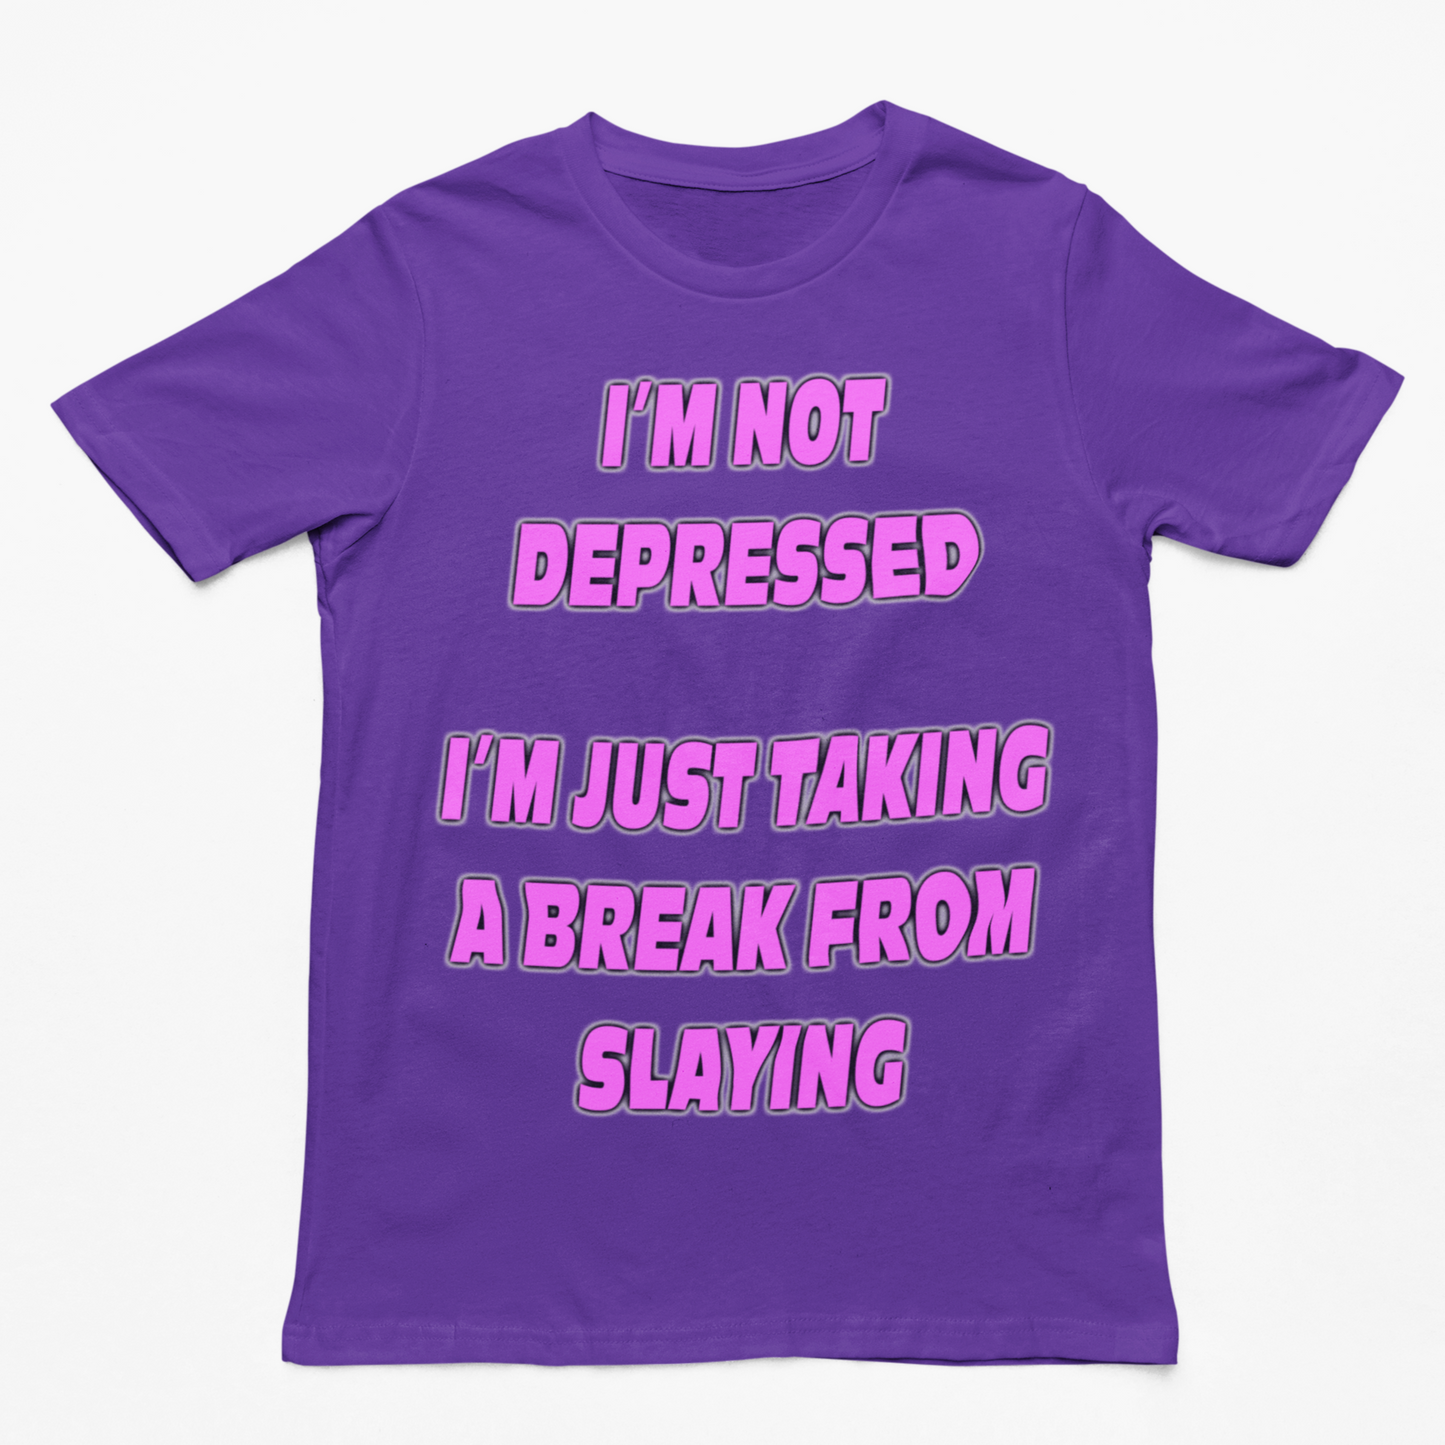 I'm Not Depressed I'm Just Taking a Break From Slaying t-shirt